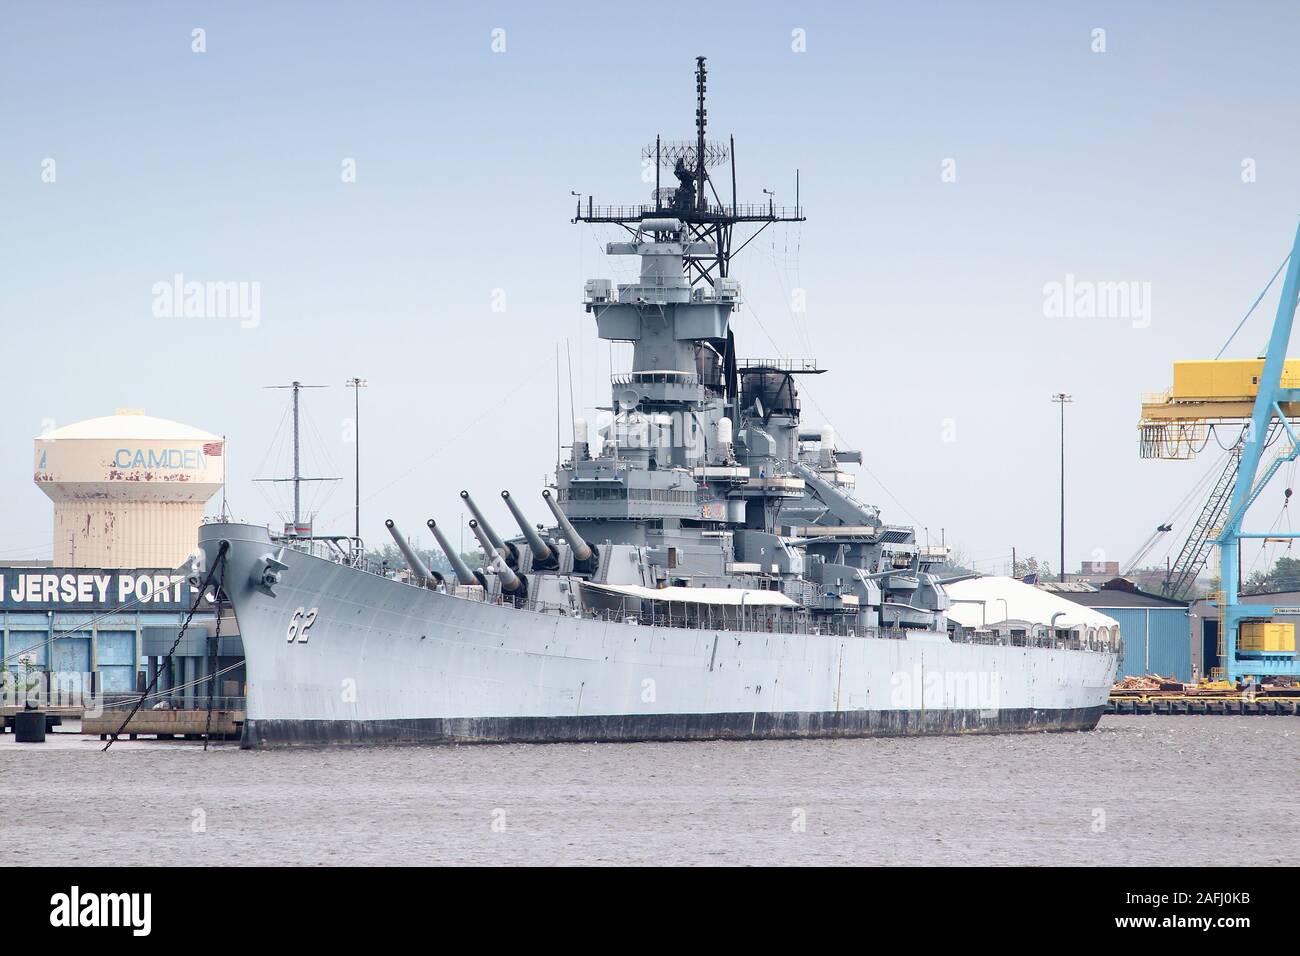 CAMDEN, USA - JUNE 11, 2013: USS New Jersey museum ship on Delaware River in Camden, USA. The Iowa-class battleship is the most decorated battleship i Stock Photo